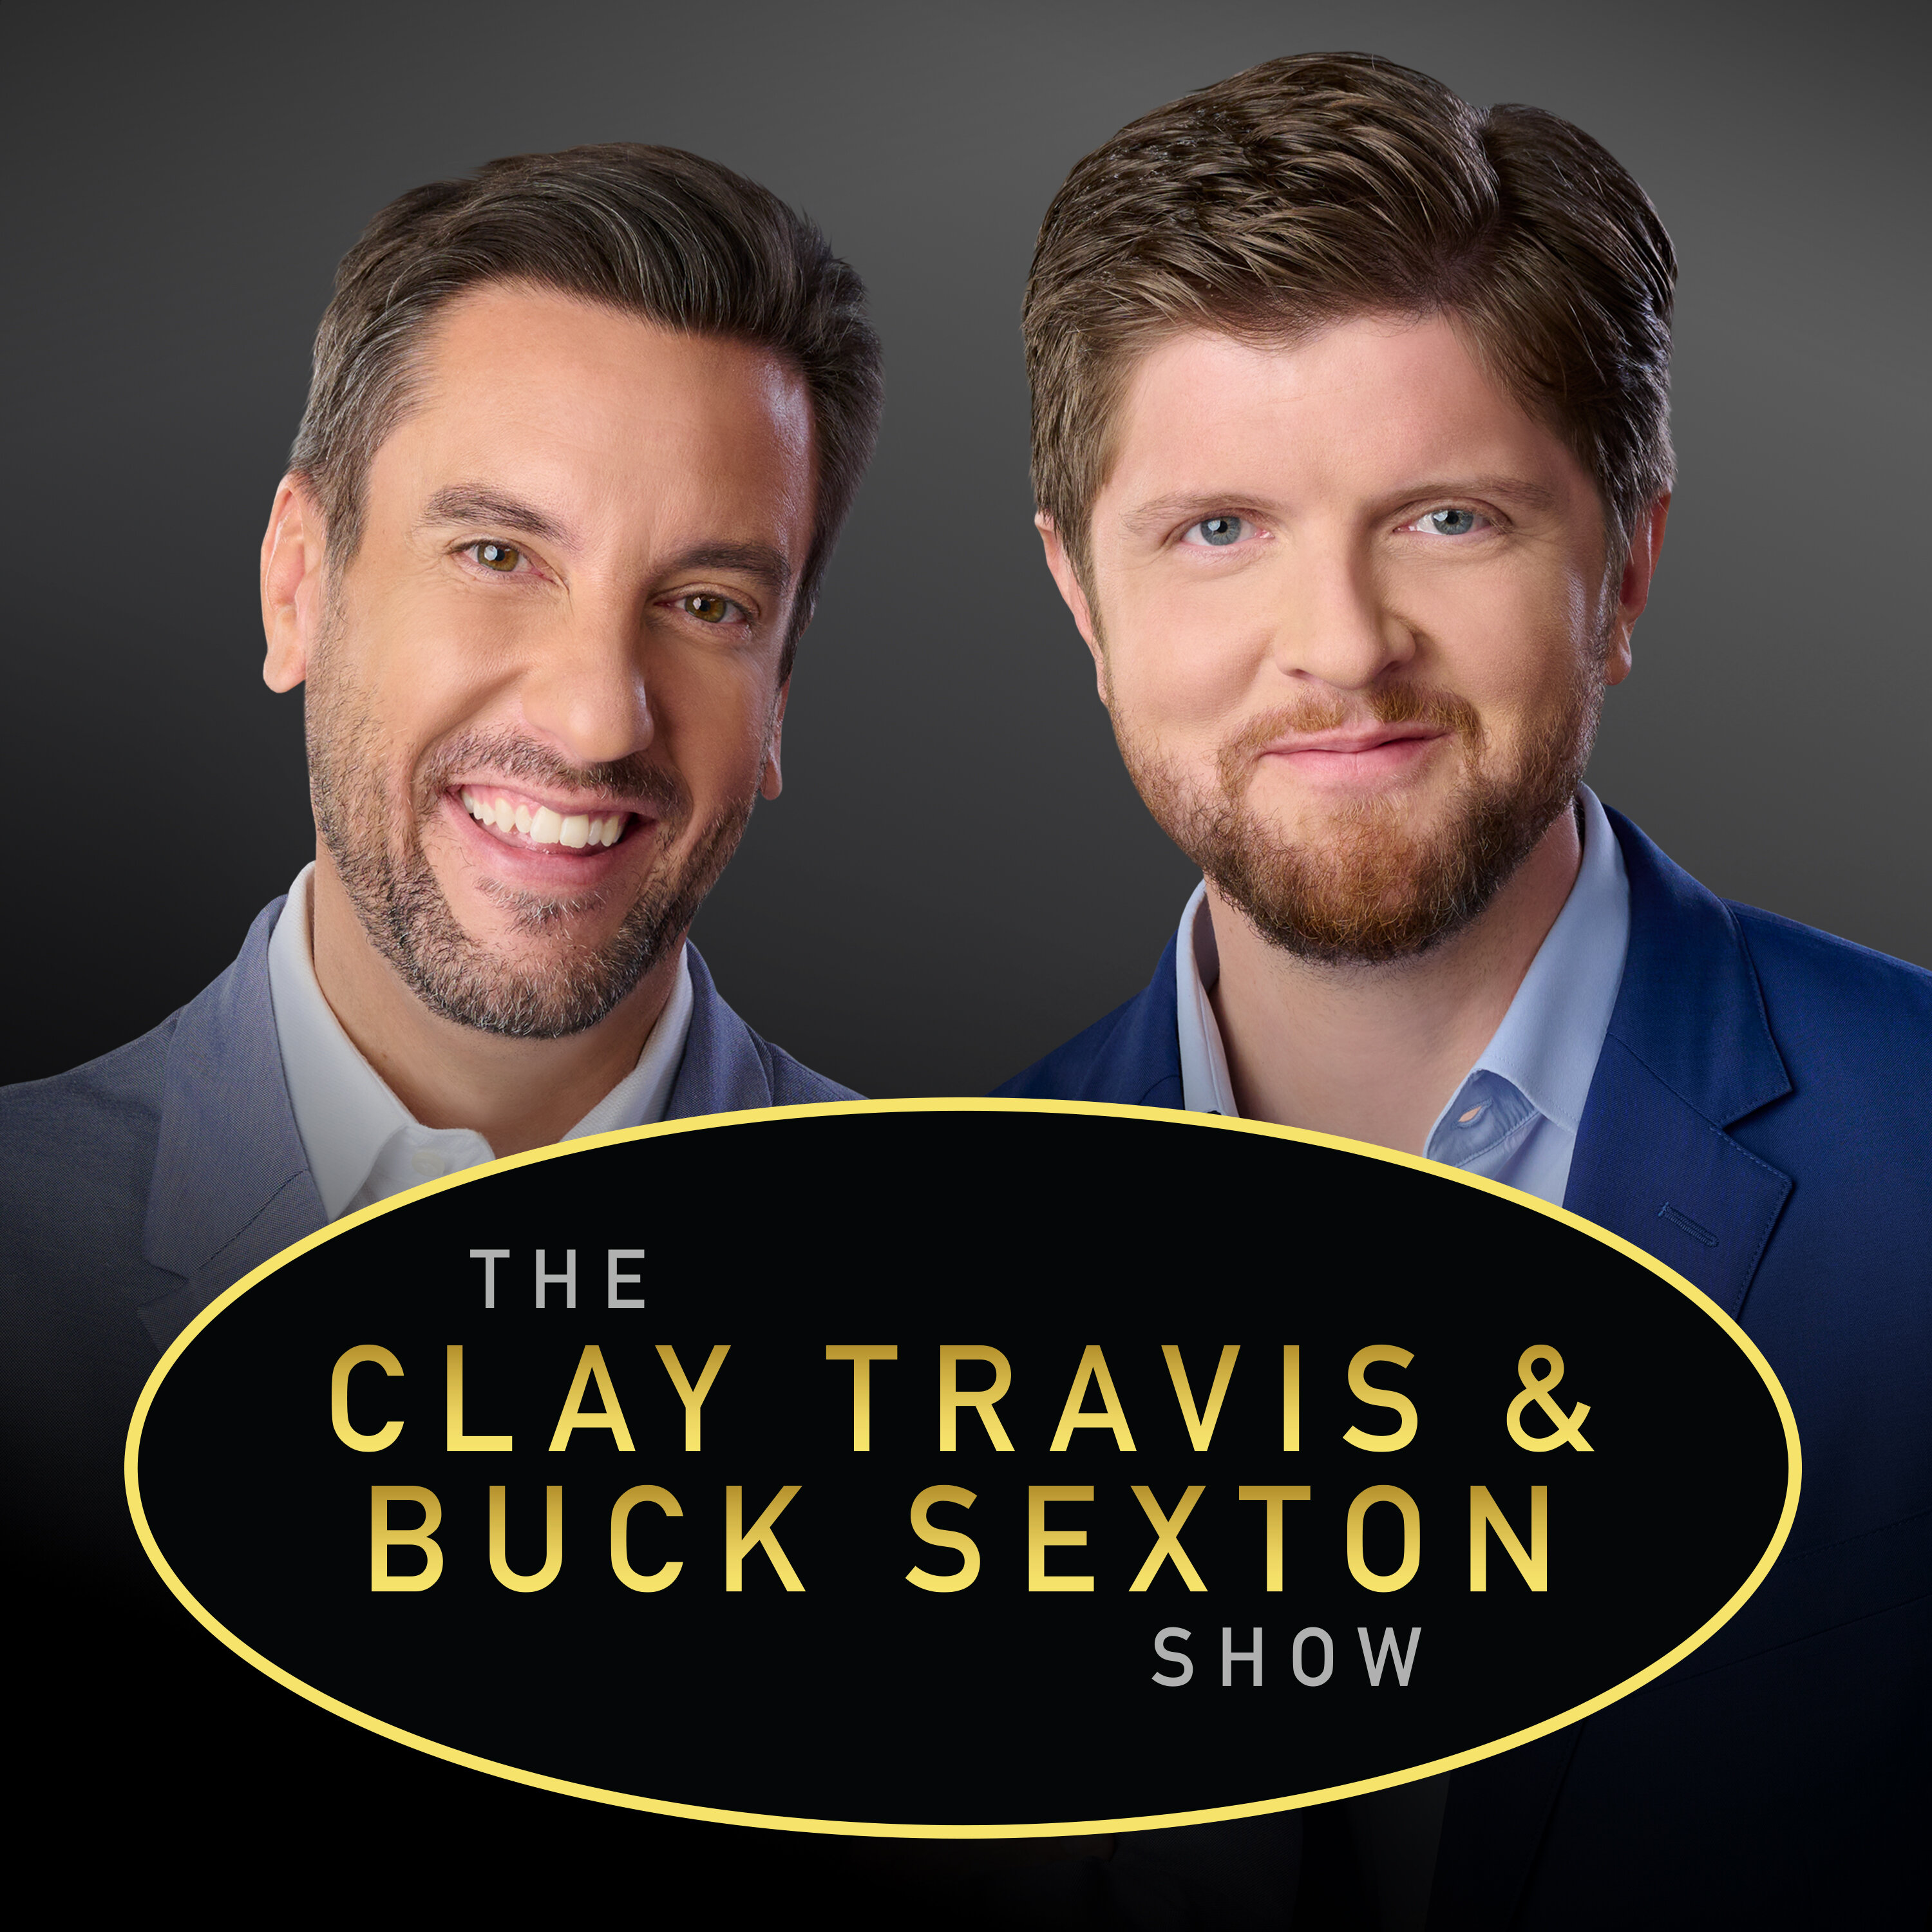 Clay Travis and Buck Sexton Show H1 – Aug 15 2022